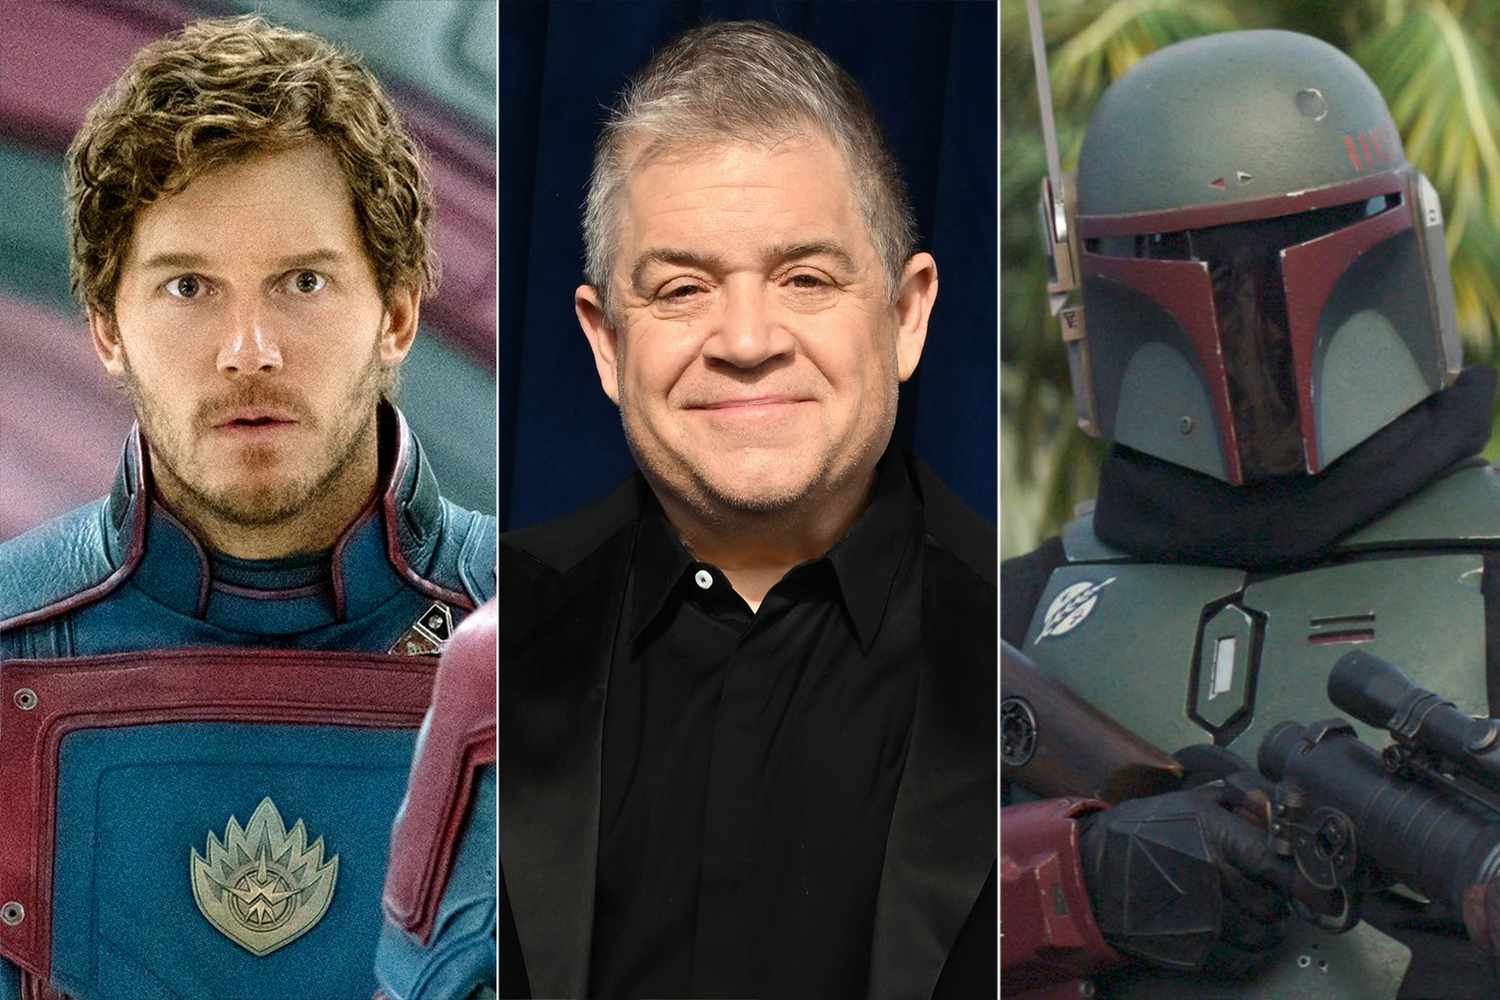 Patton Oswalt on predicting 'Star Wars' and Marvel filibuster storyline in 'Parks and Rec' episode